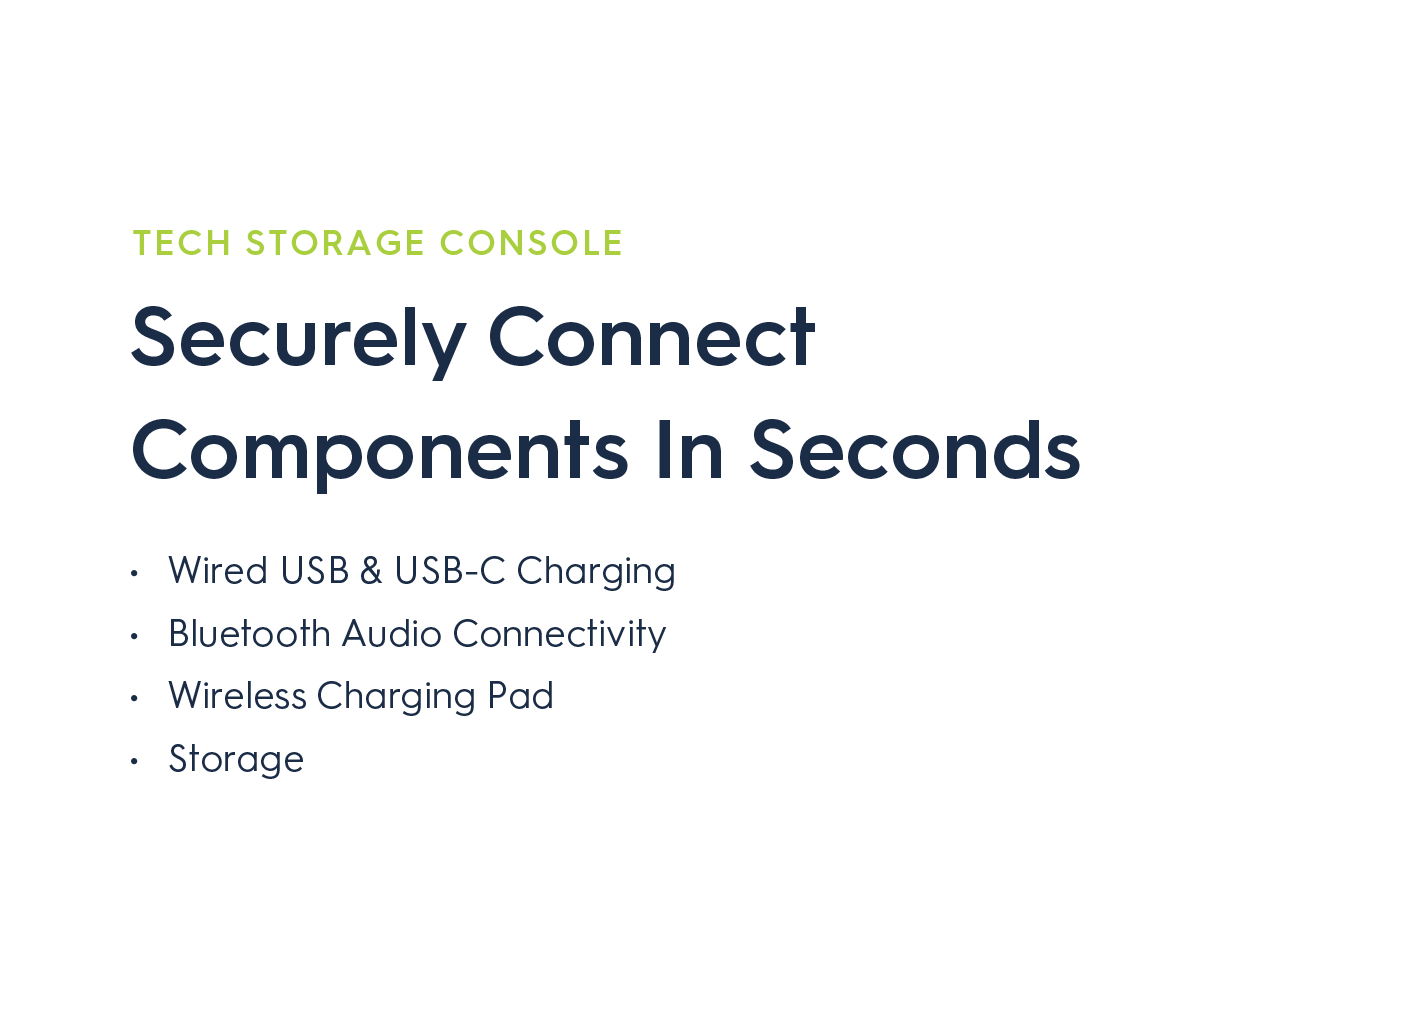 Securely connect components in seconds.